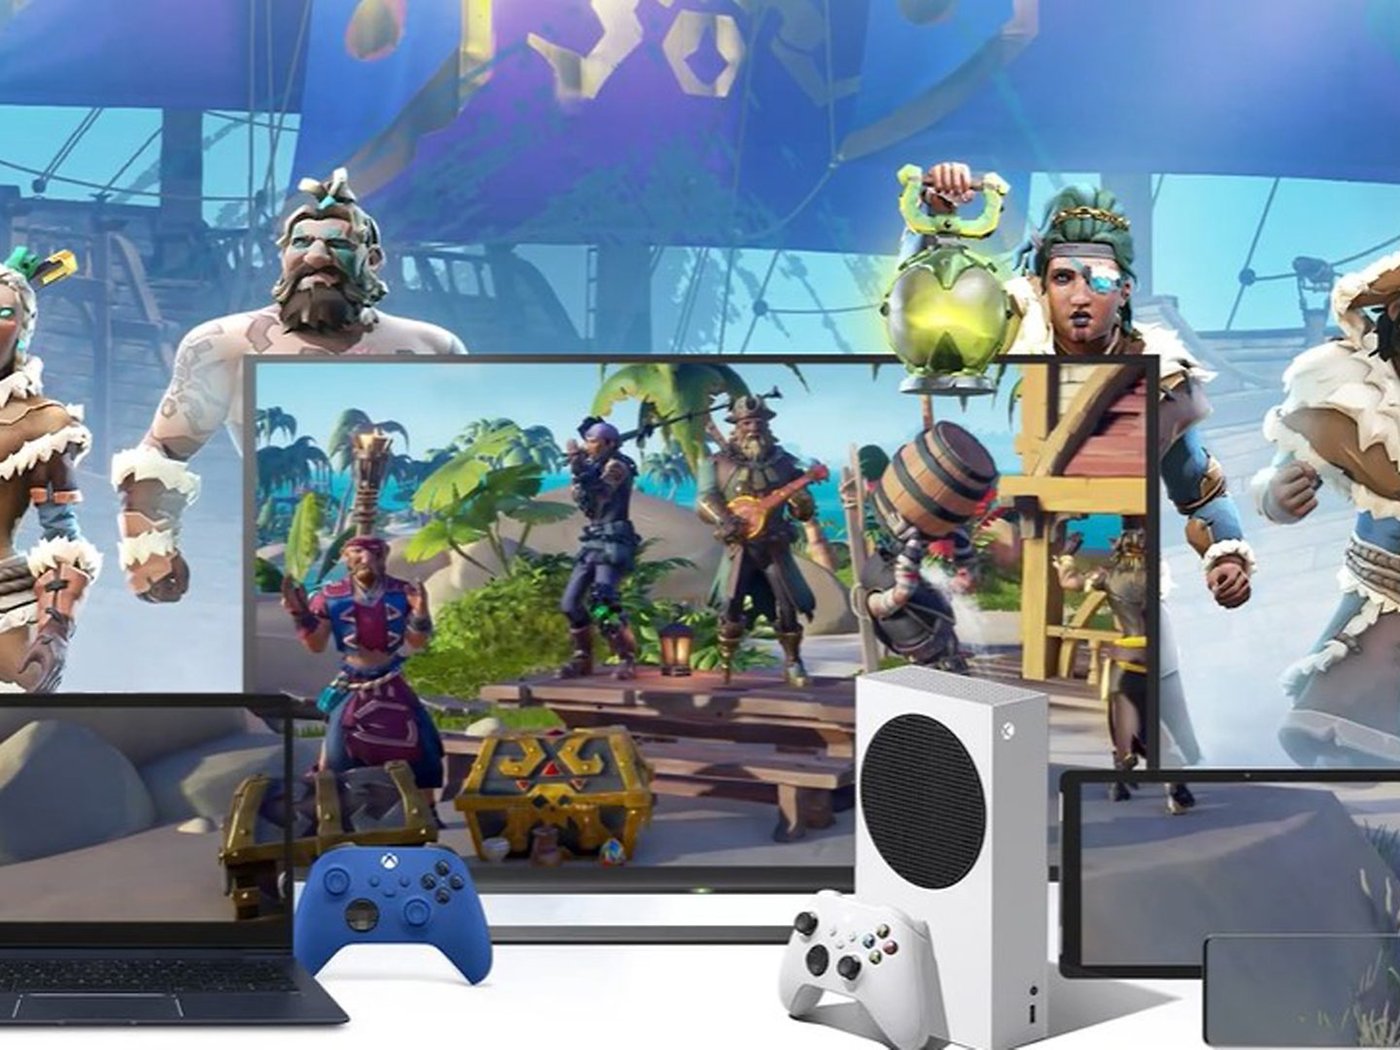 Xbox Game Pass comes to new Samsung smart TVs on June 30th